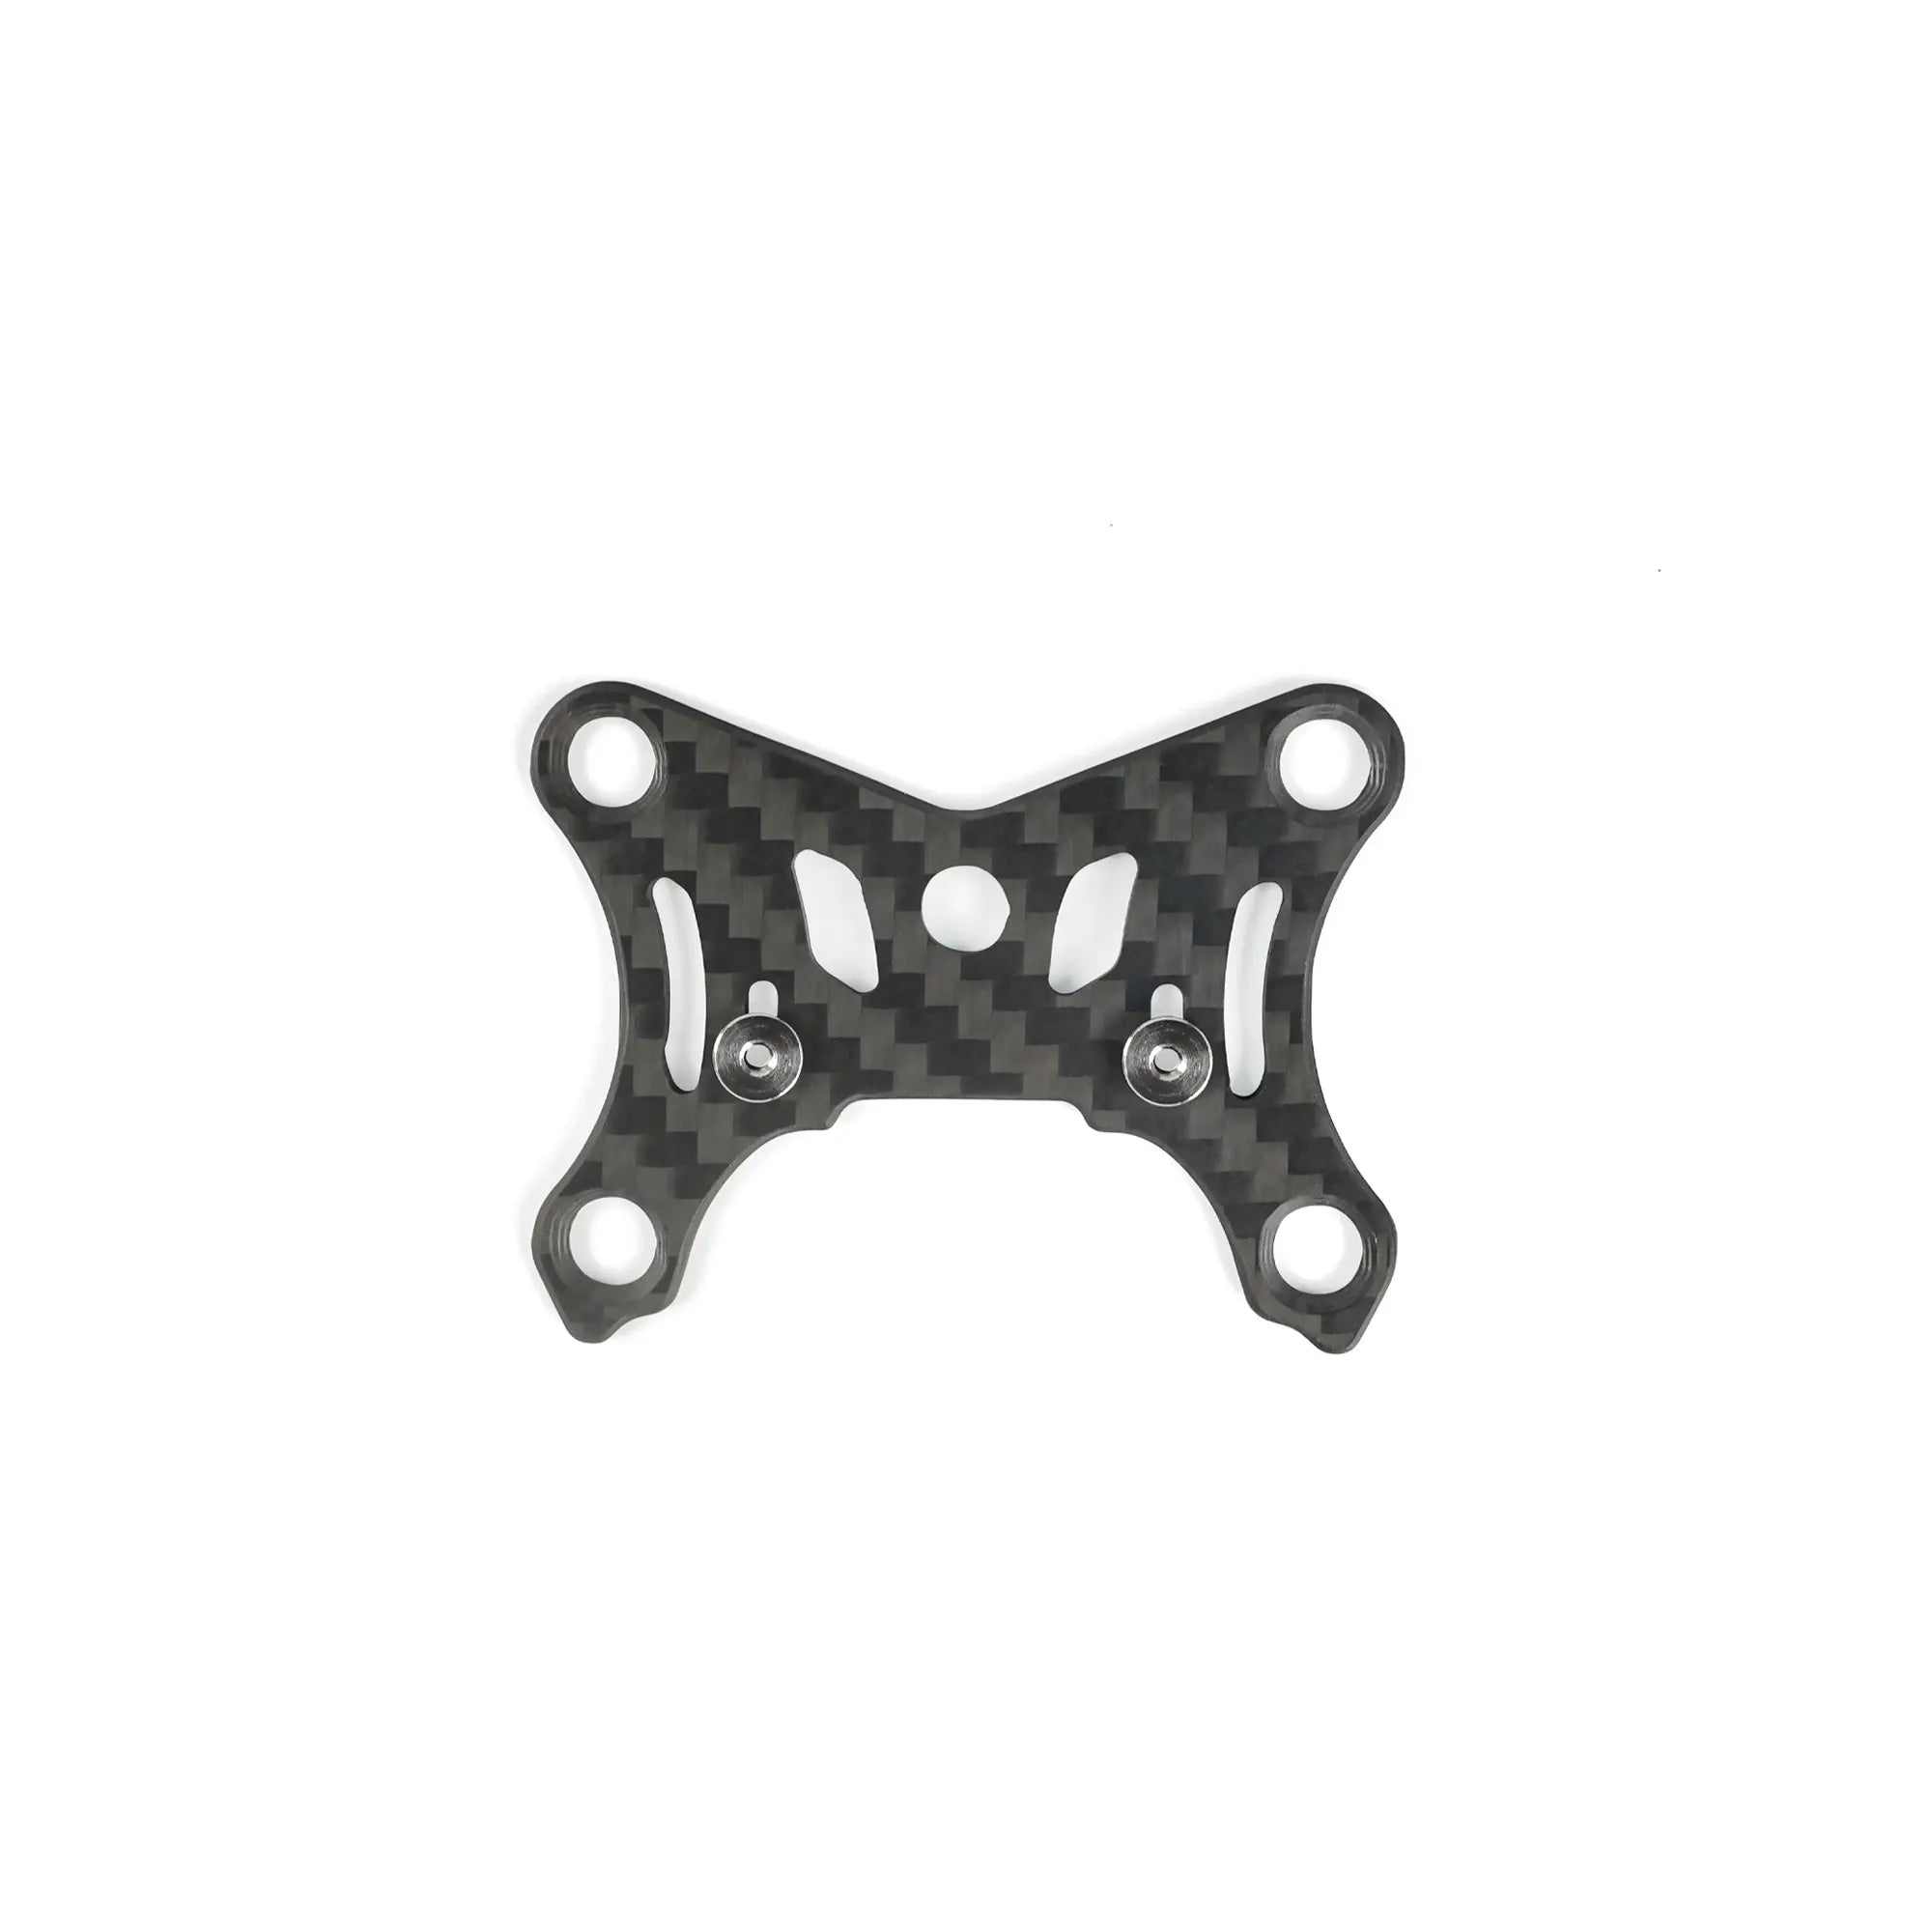 GEPRC GEP-CT30 Frame Parts 3inch Propeller Accessory 